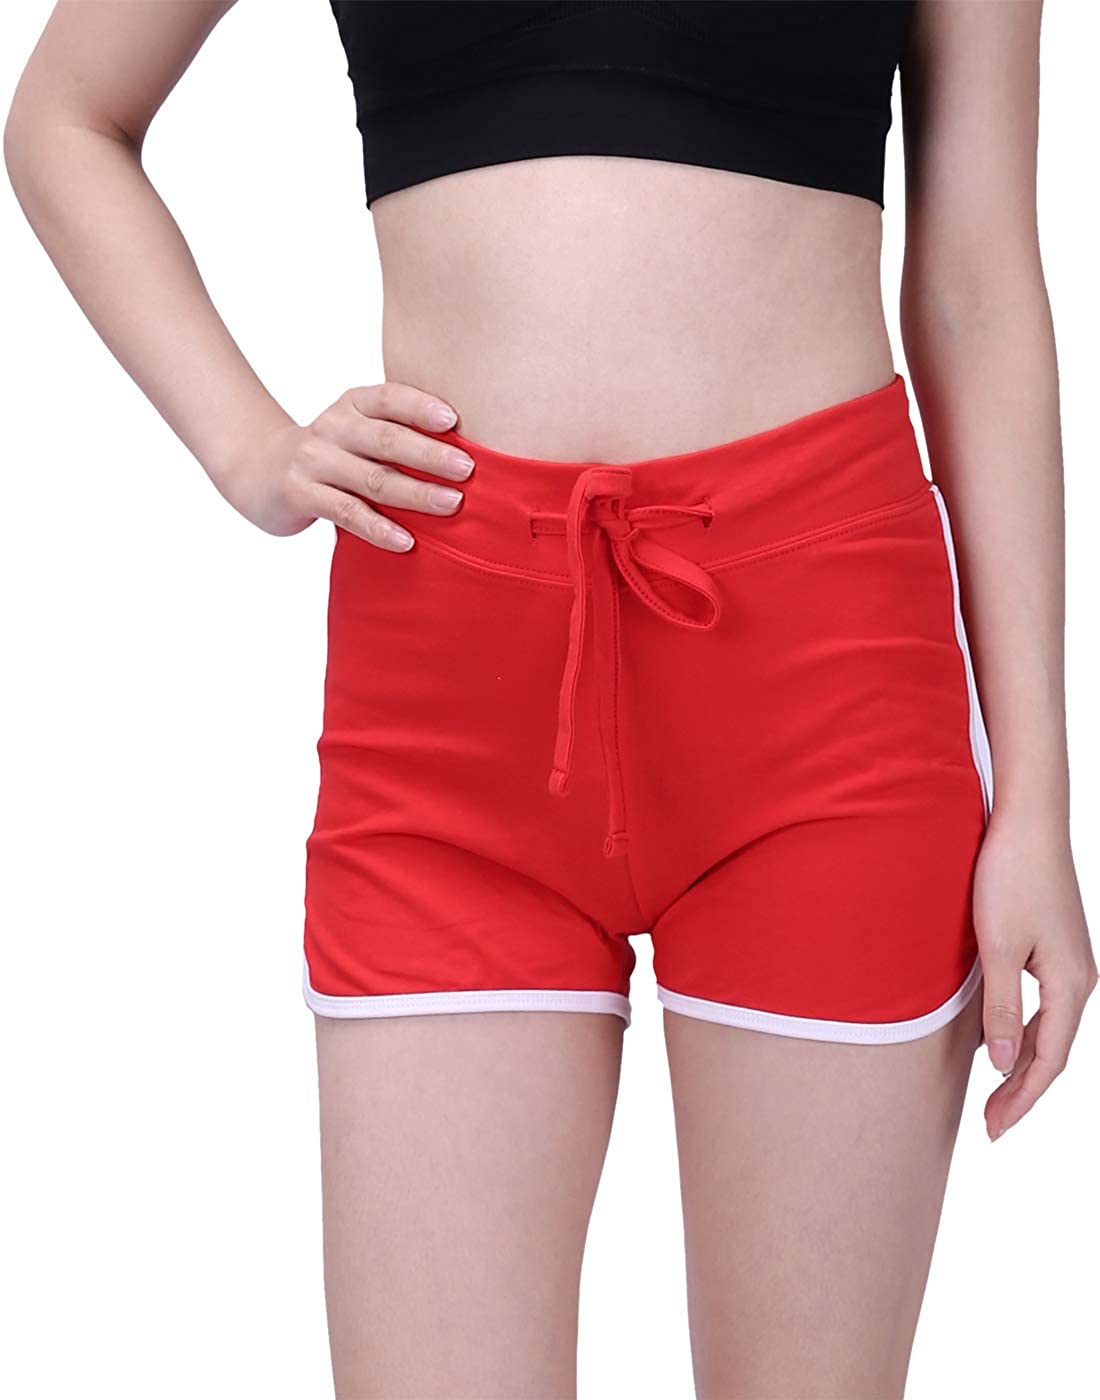 HDE Plus Size Dolphin Shorts for Women Running Workout Short